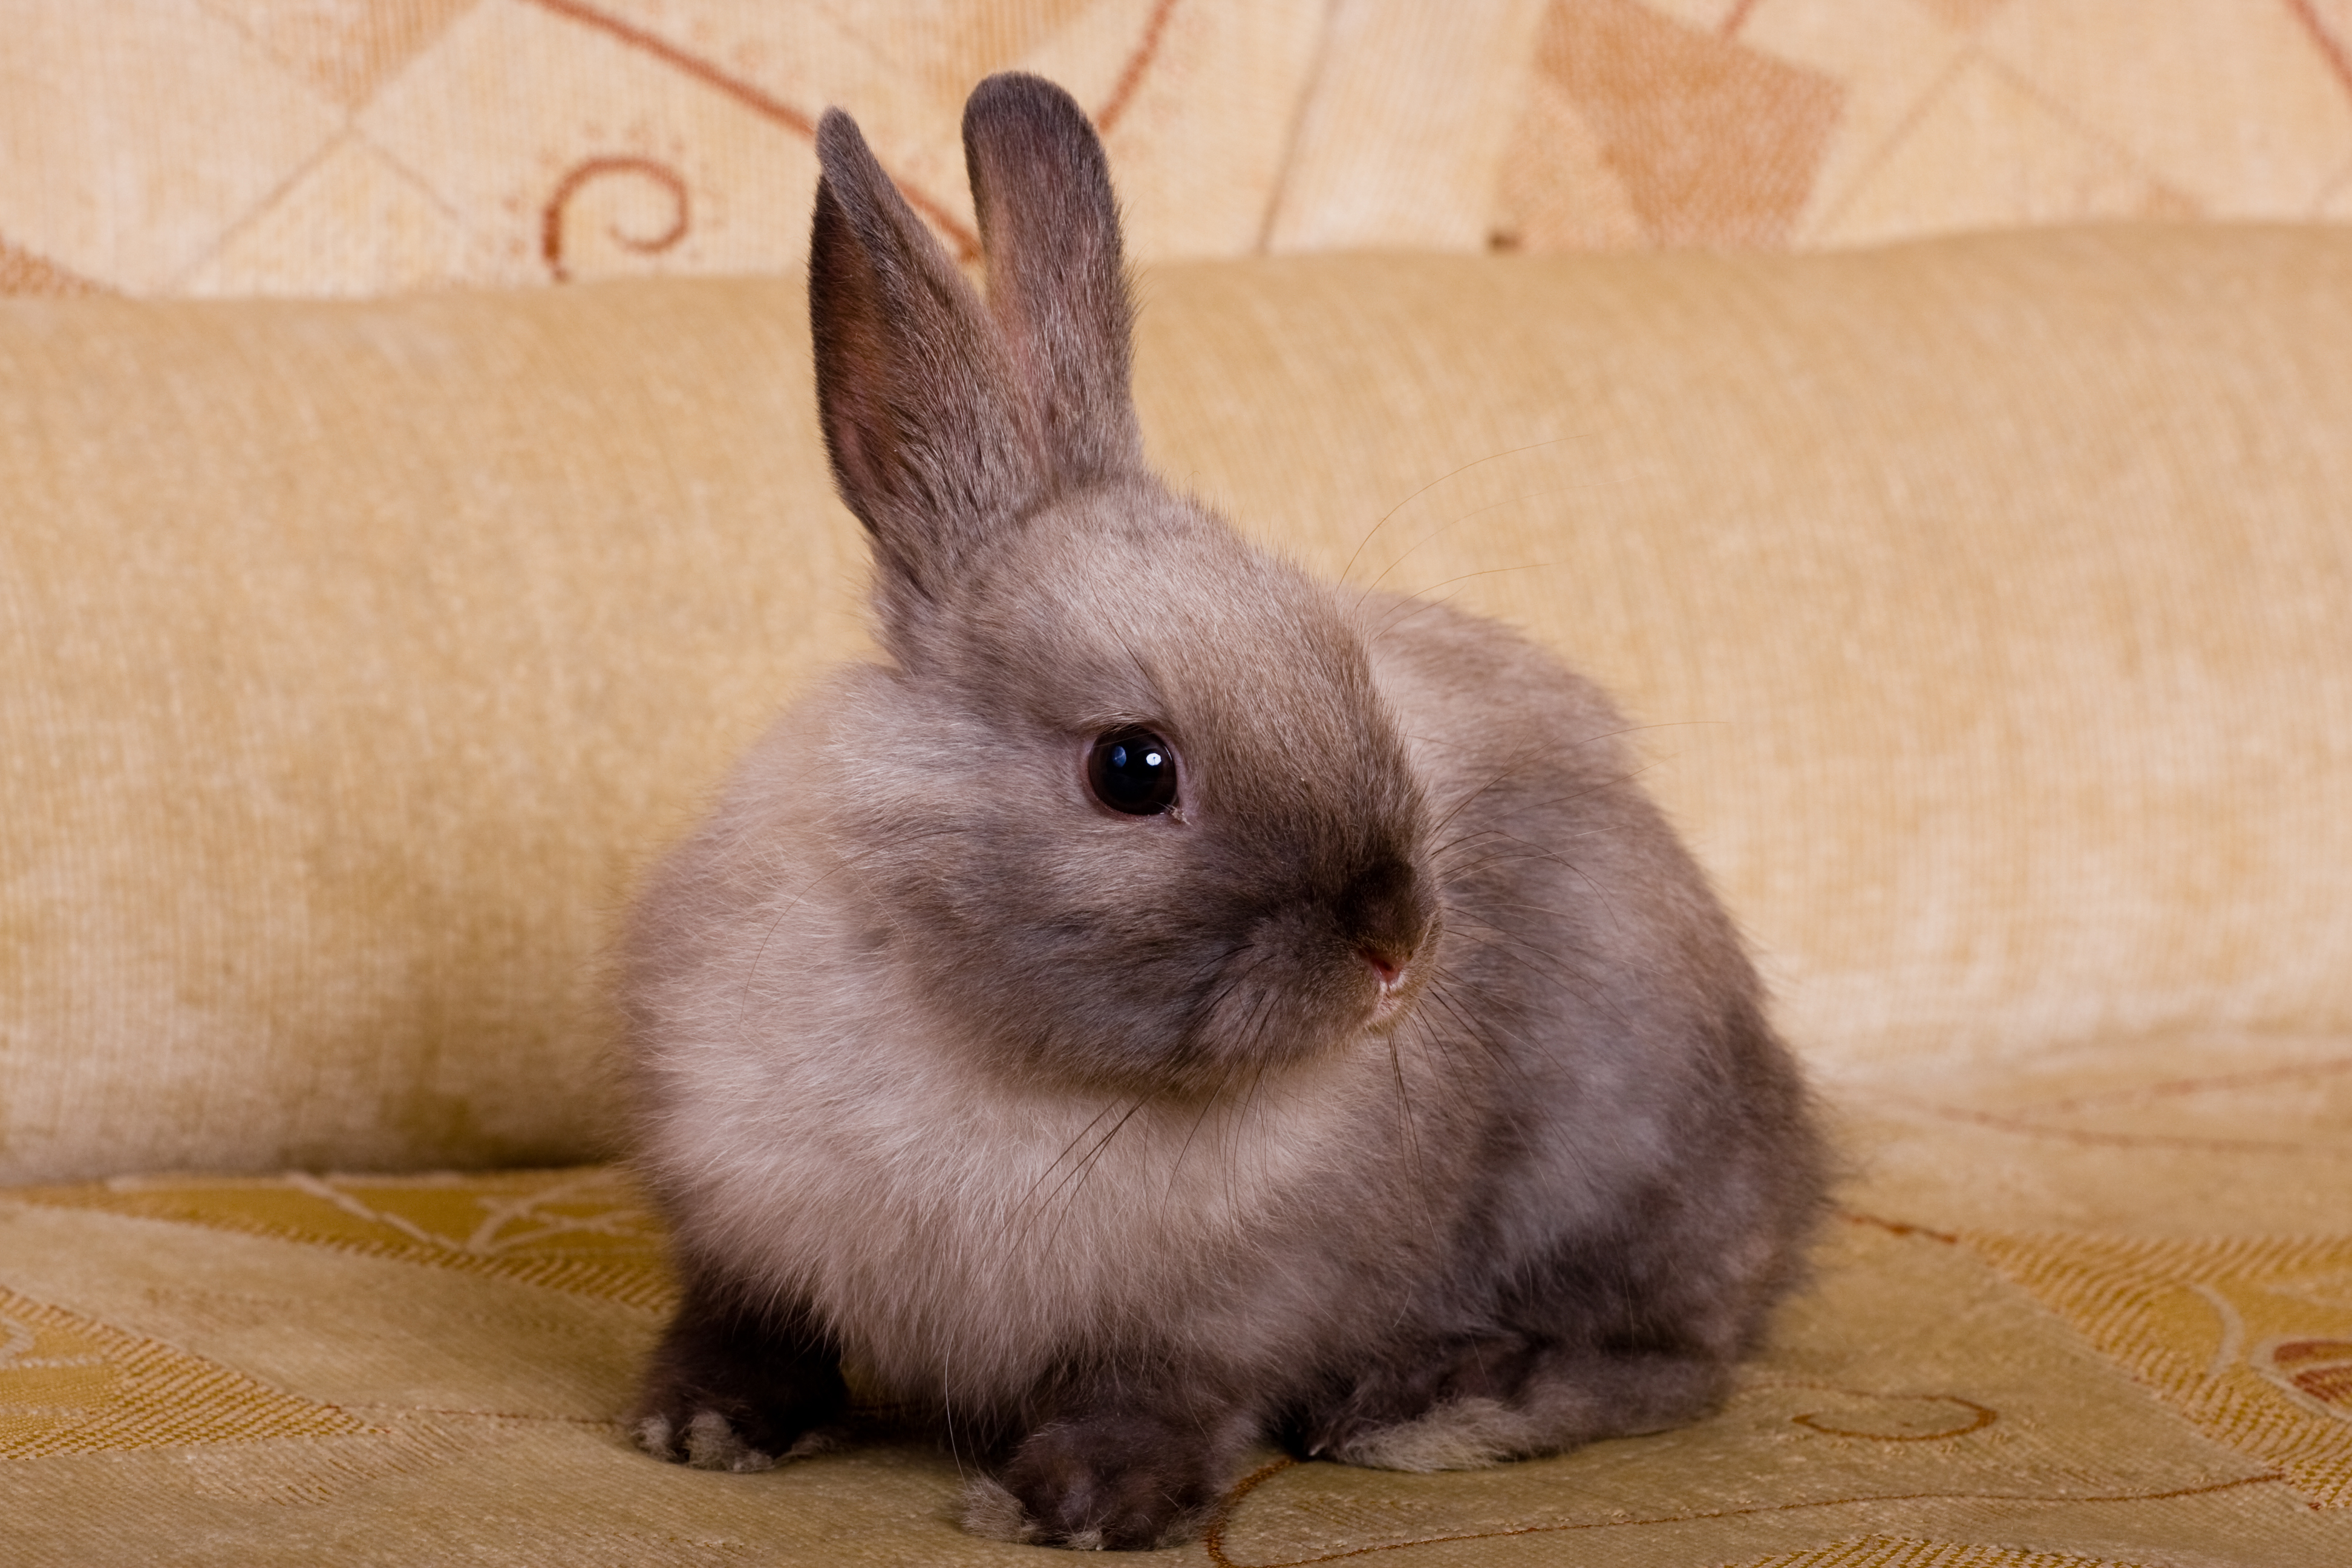 Can Rabbits Walk on a Leash? | Petfinder